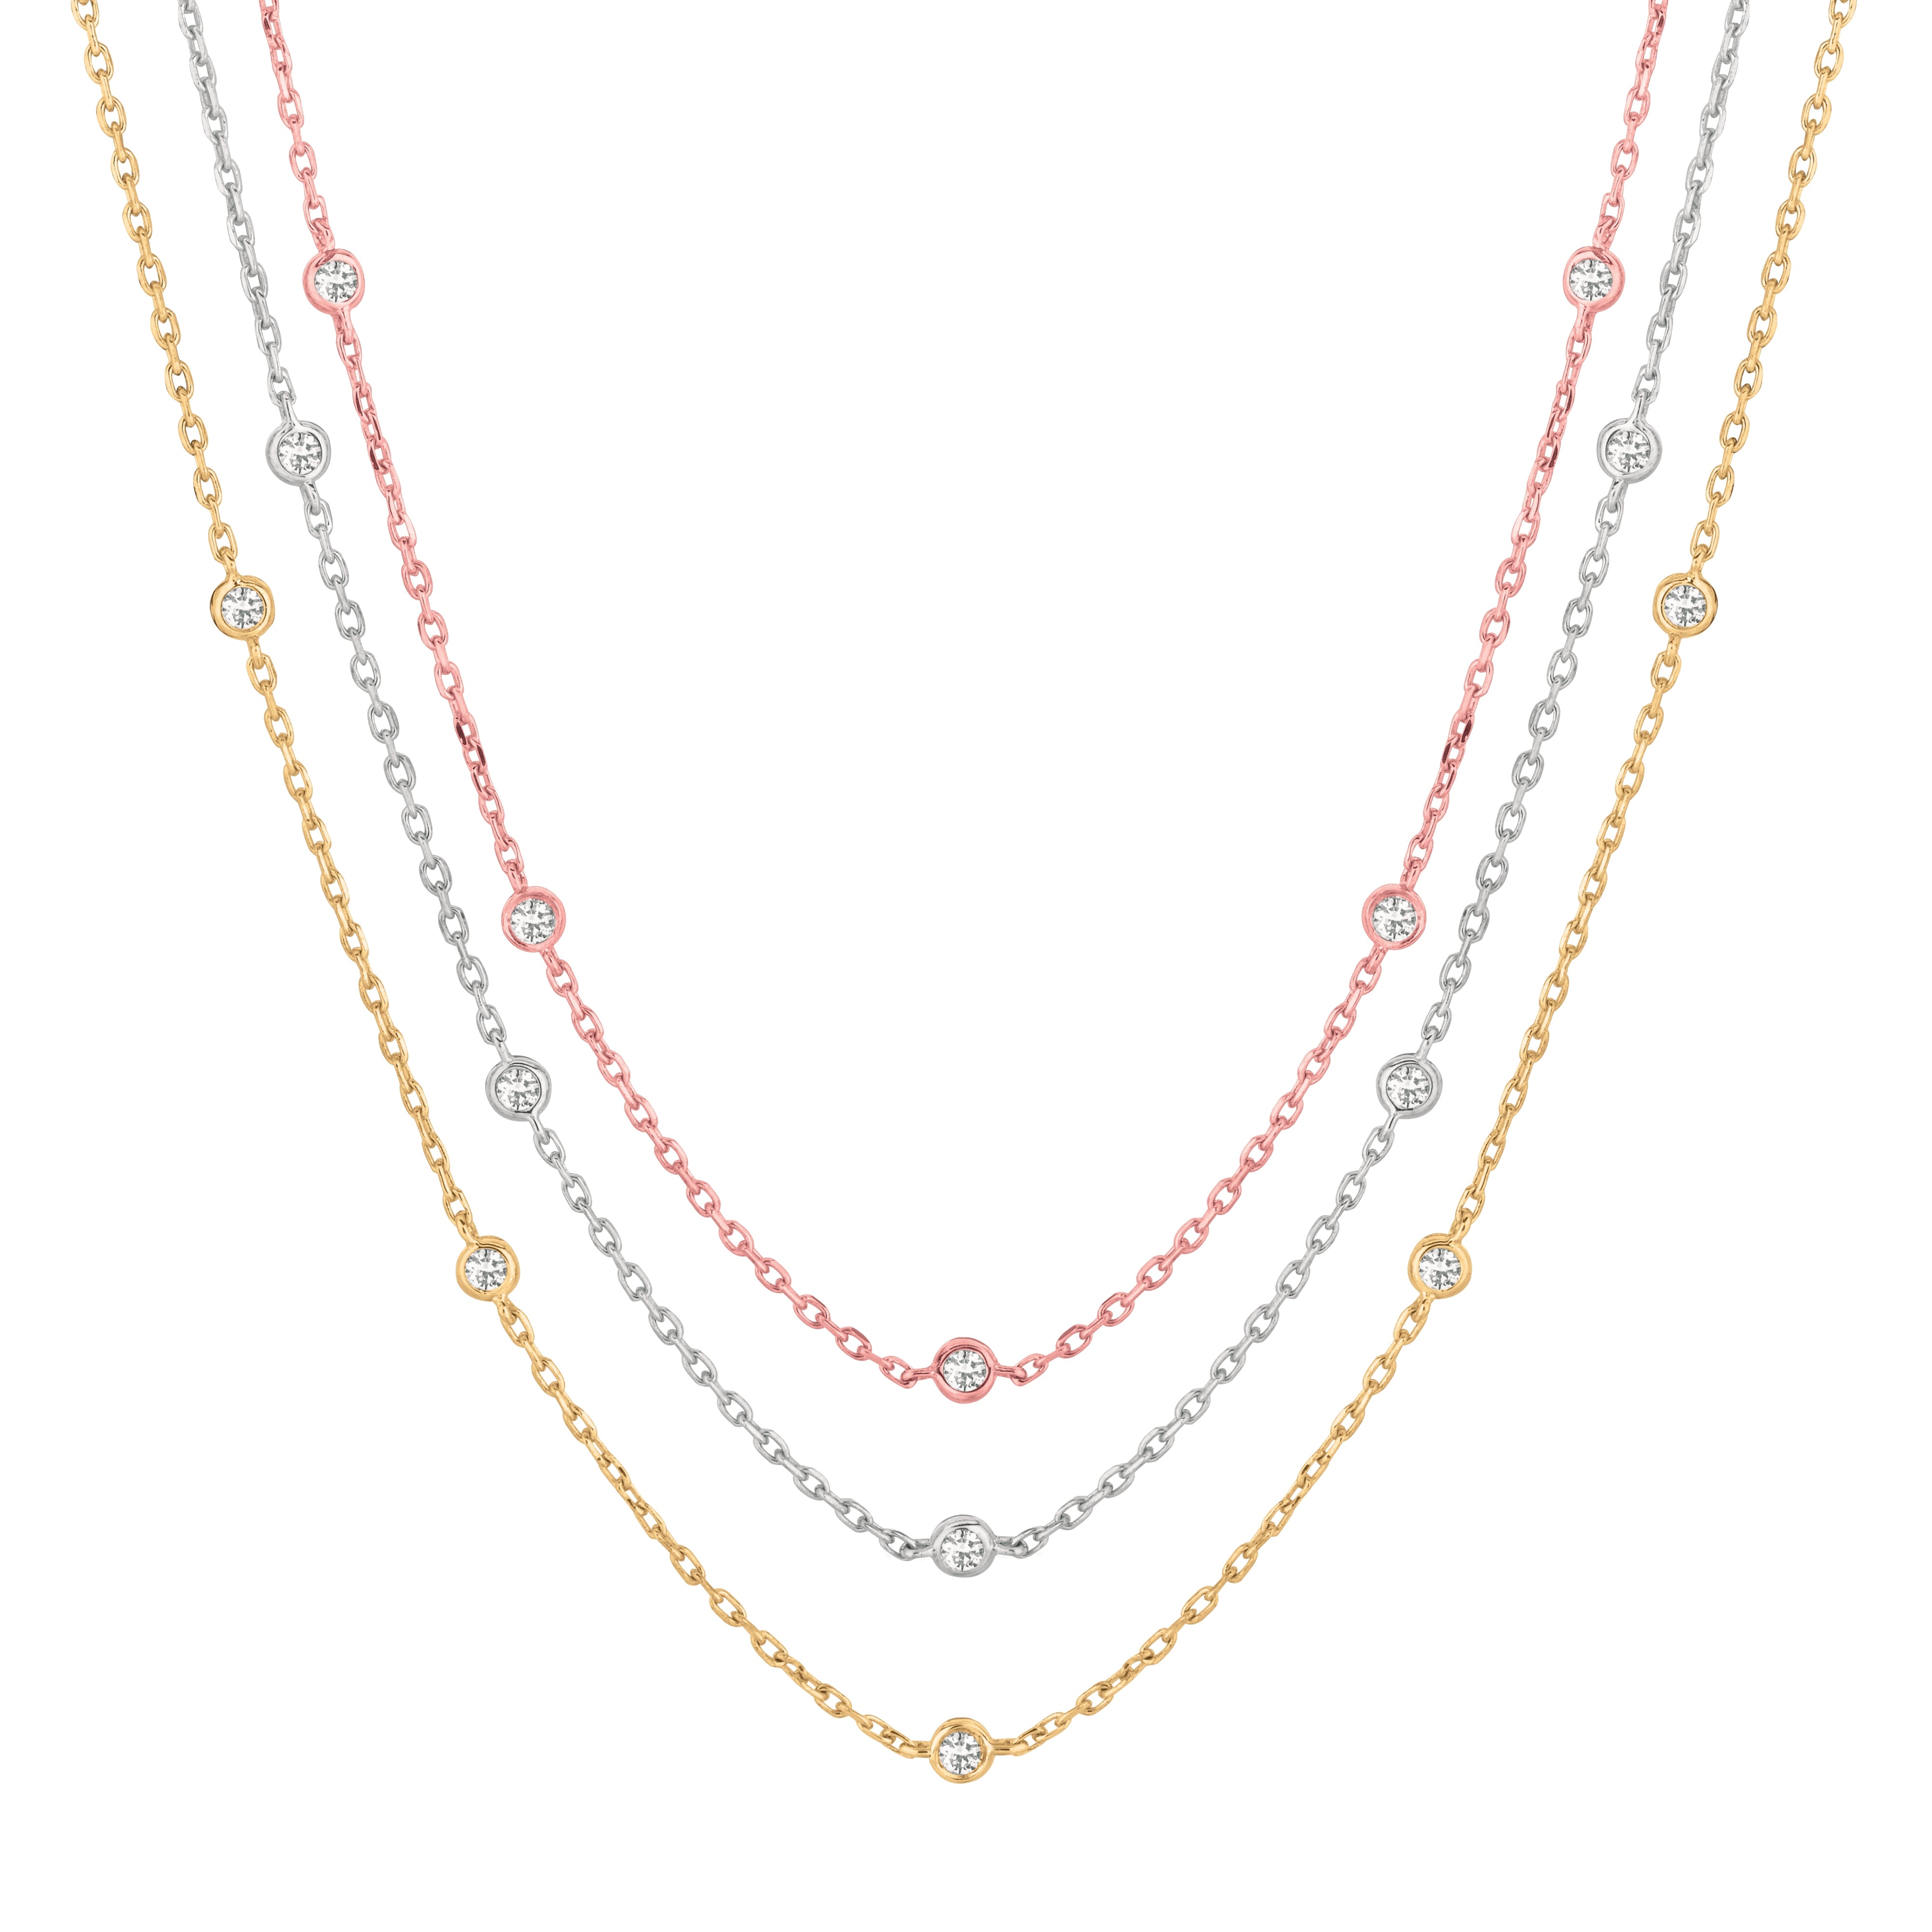 1.80CTW BR DIA BY YARD NECKLACE 18